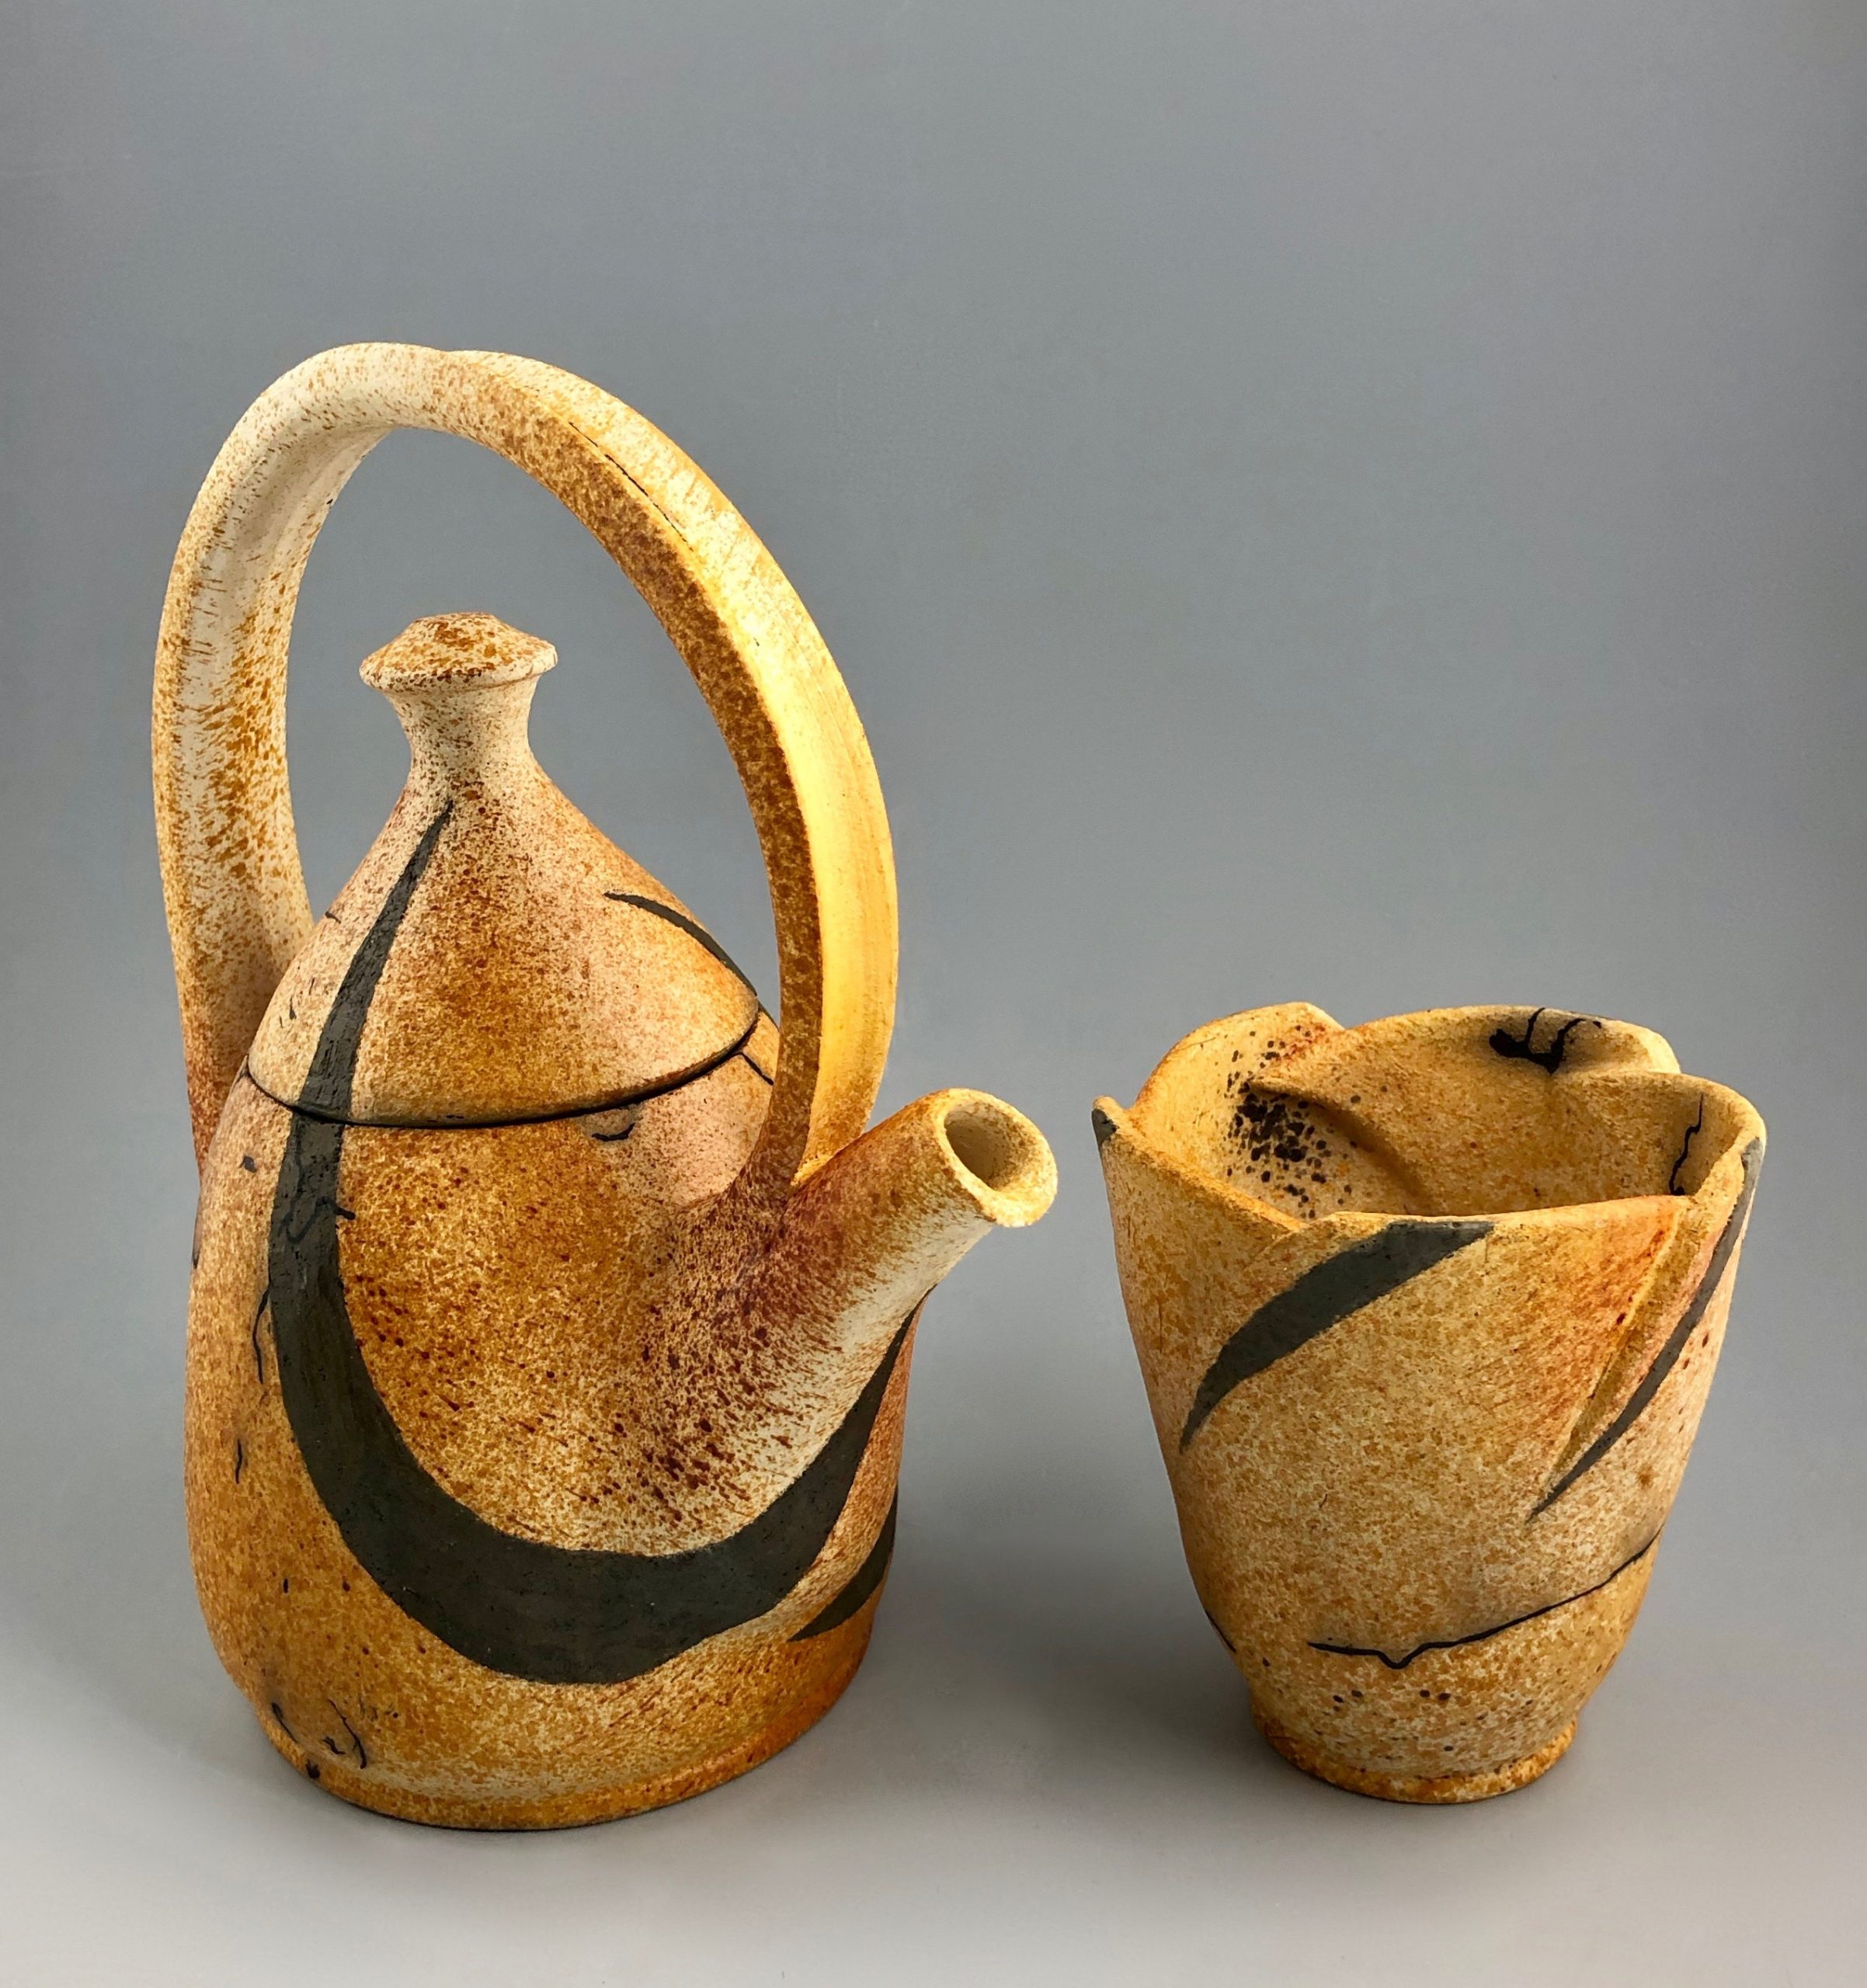 Swanica Ligtenberg, horsehair raku teapot set, 11 1/2 in. (29 cm) in height, high-fire white clay, black clay, mishima, bisque fired to cone 04, sugar, ferric chloride, raku fired to 1150°F. (621°C), horsehair, food-safe lacquer